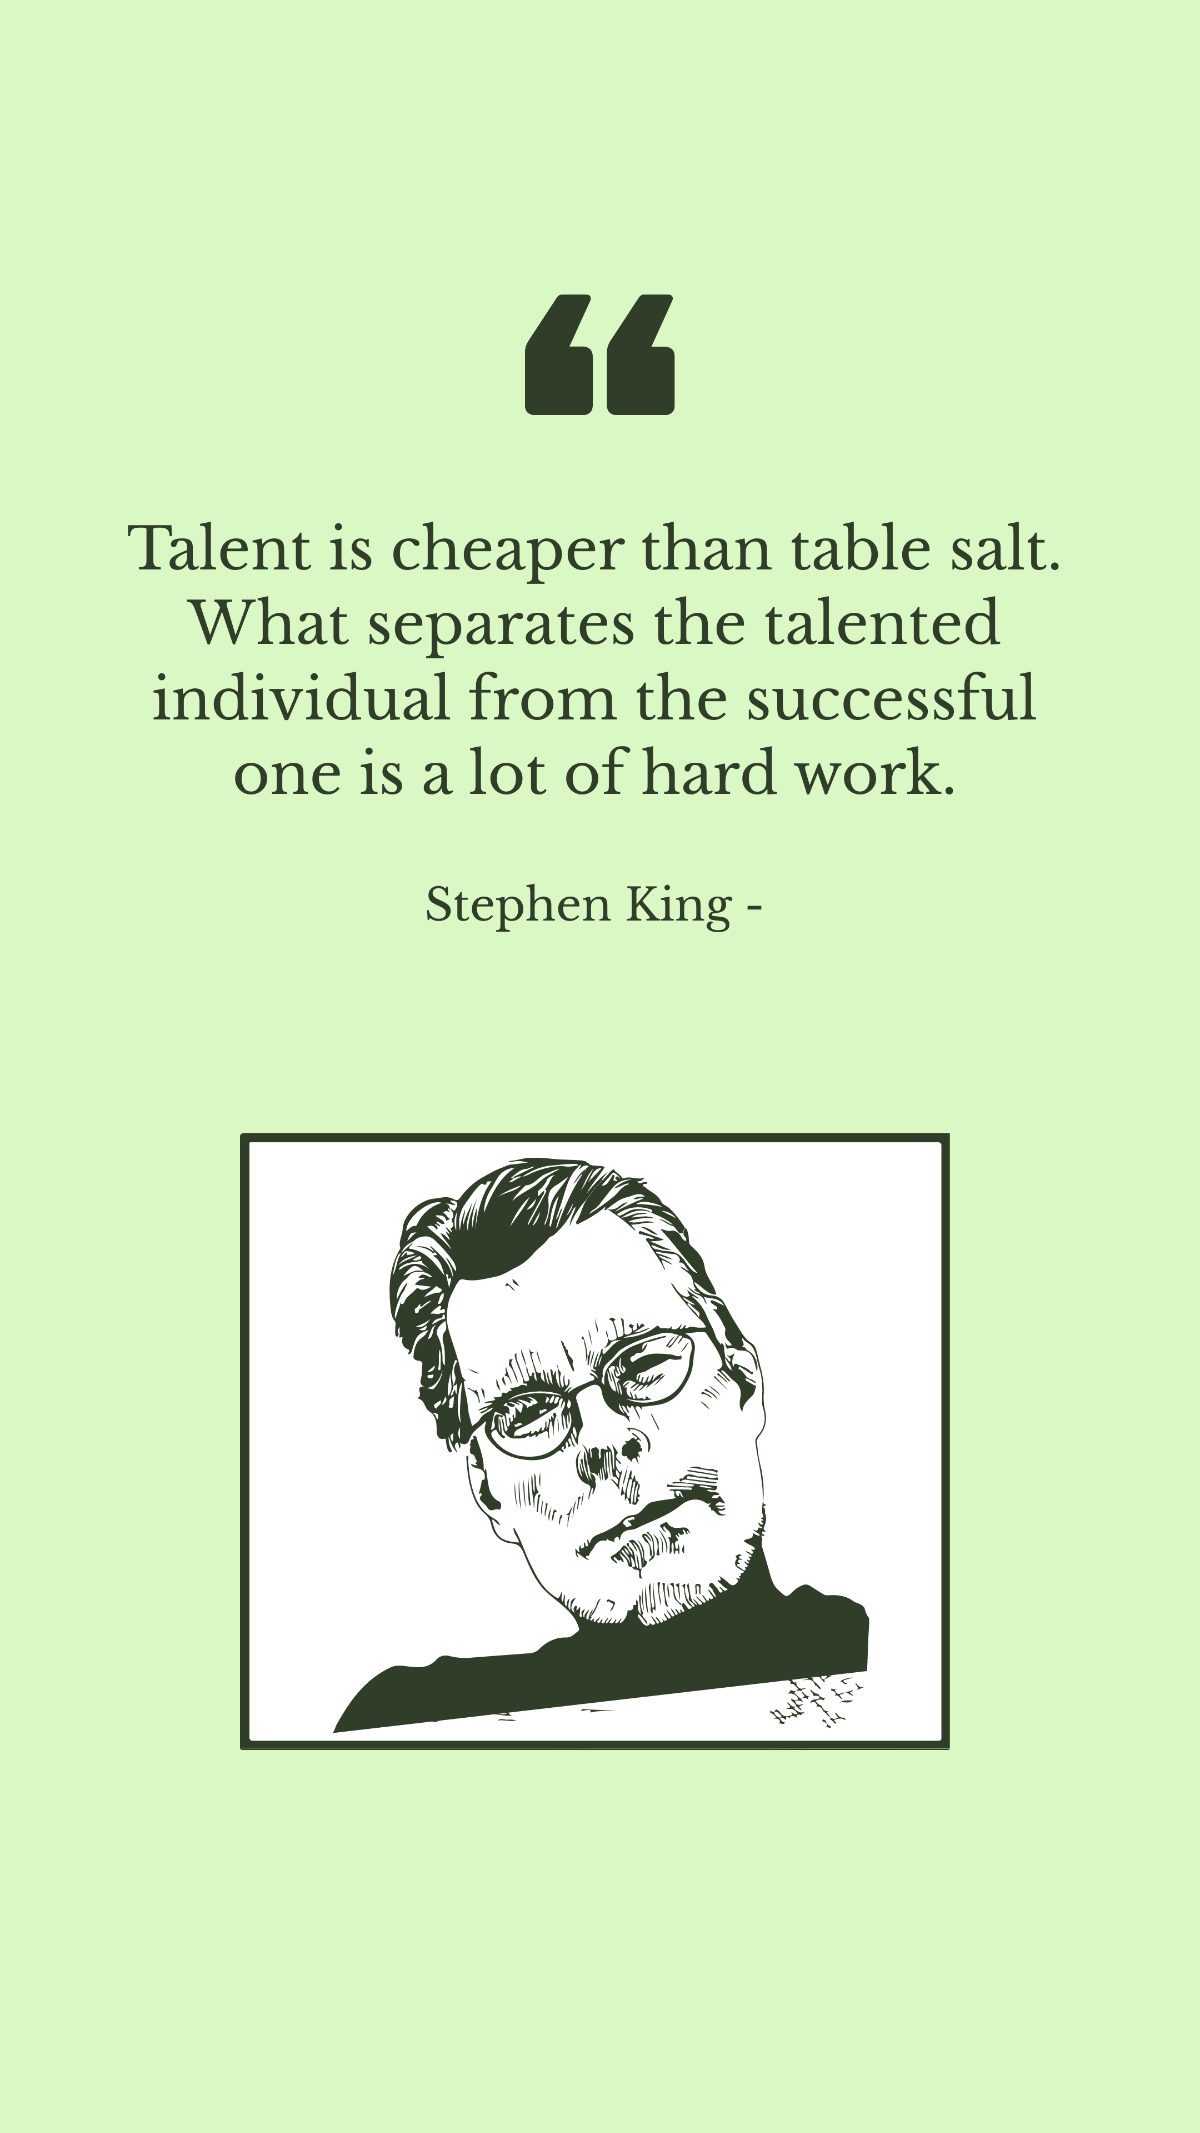 Free Stephen King - Talent is cheaper than table salt. What separates the talented individual from the successful one is a lot of hard work. Template